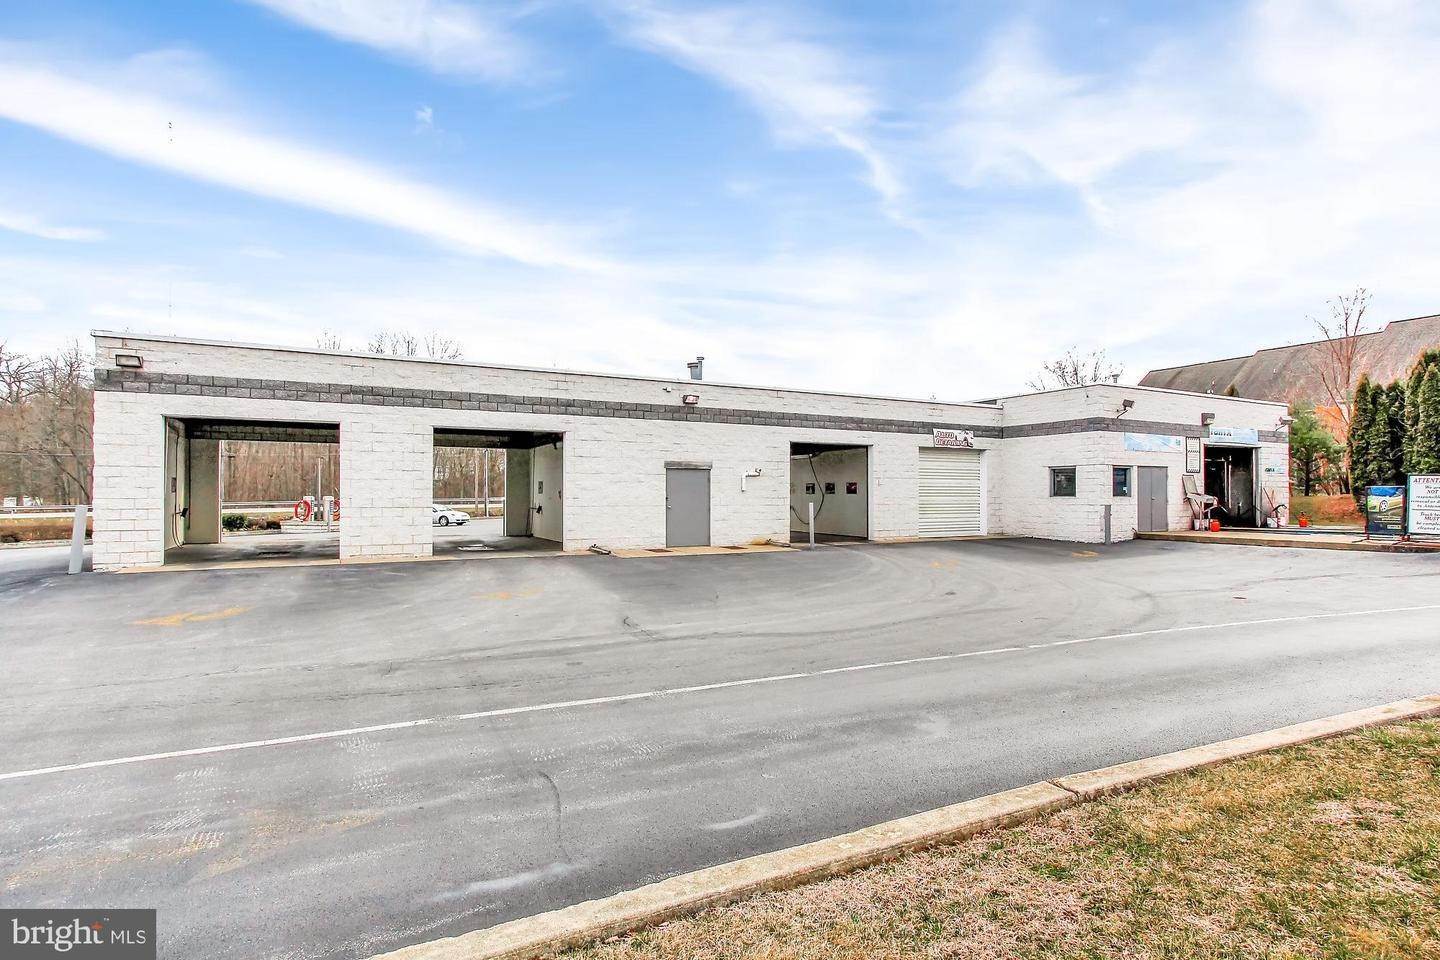 17. Commercial for Sale at 315 HERSHEY Road Elizabethtown, Pennsylvania 17022 United States